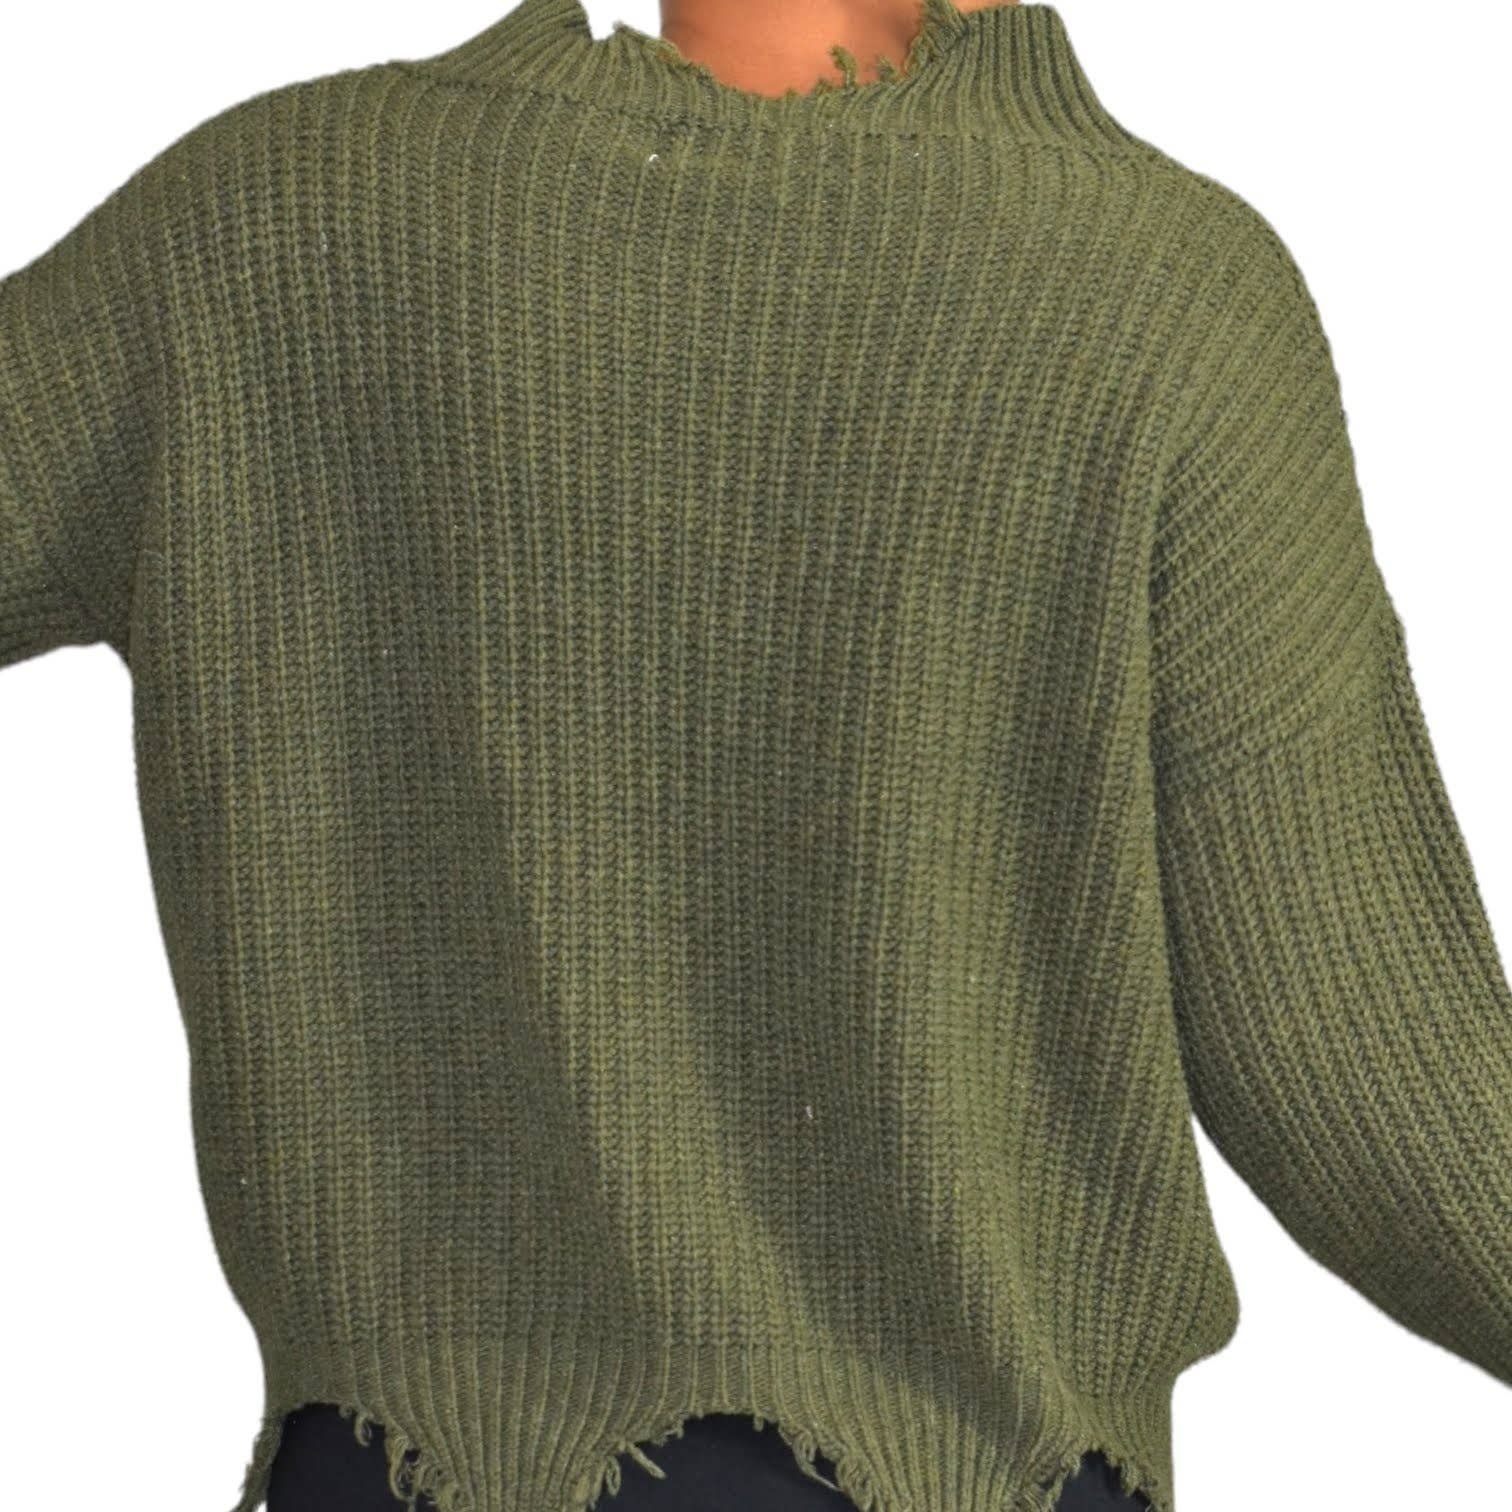 Seek the Label Distressed Sweater Olive Green Ribbed Knit Pullover Size Medium